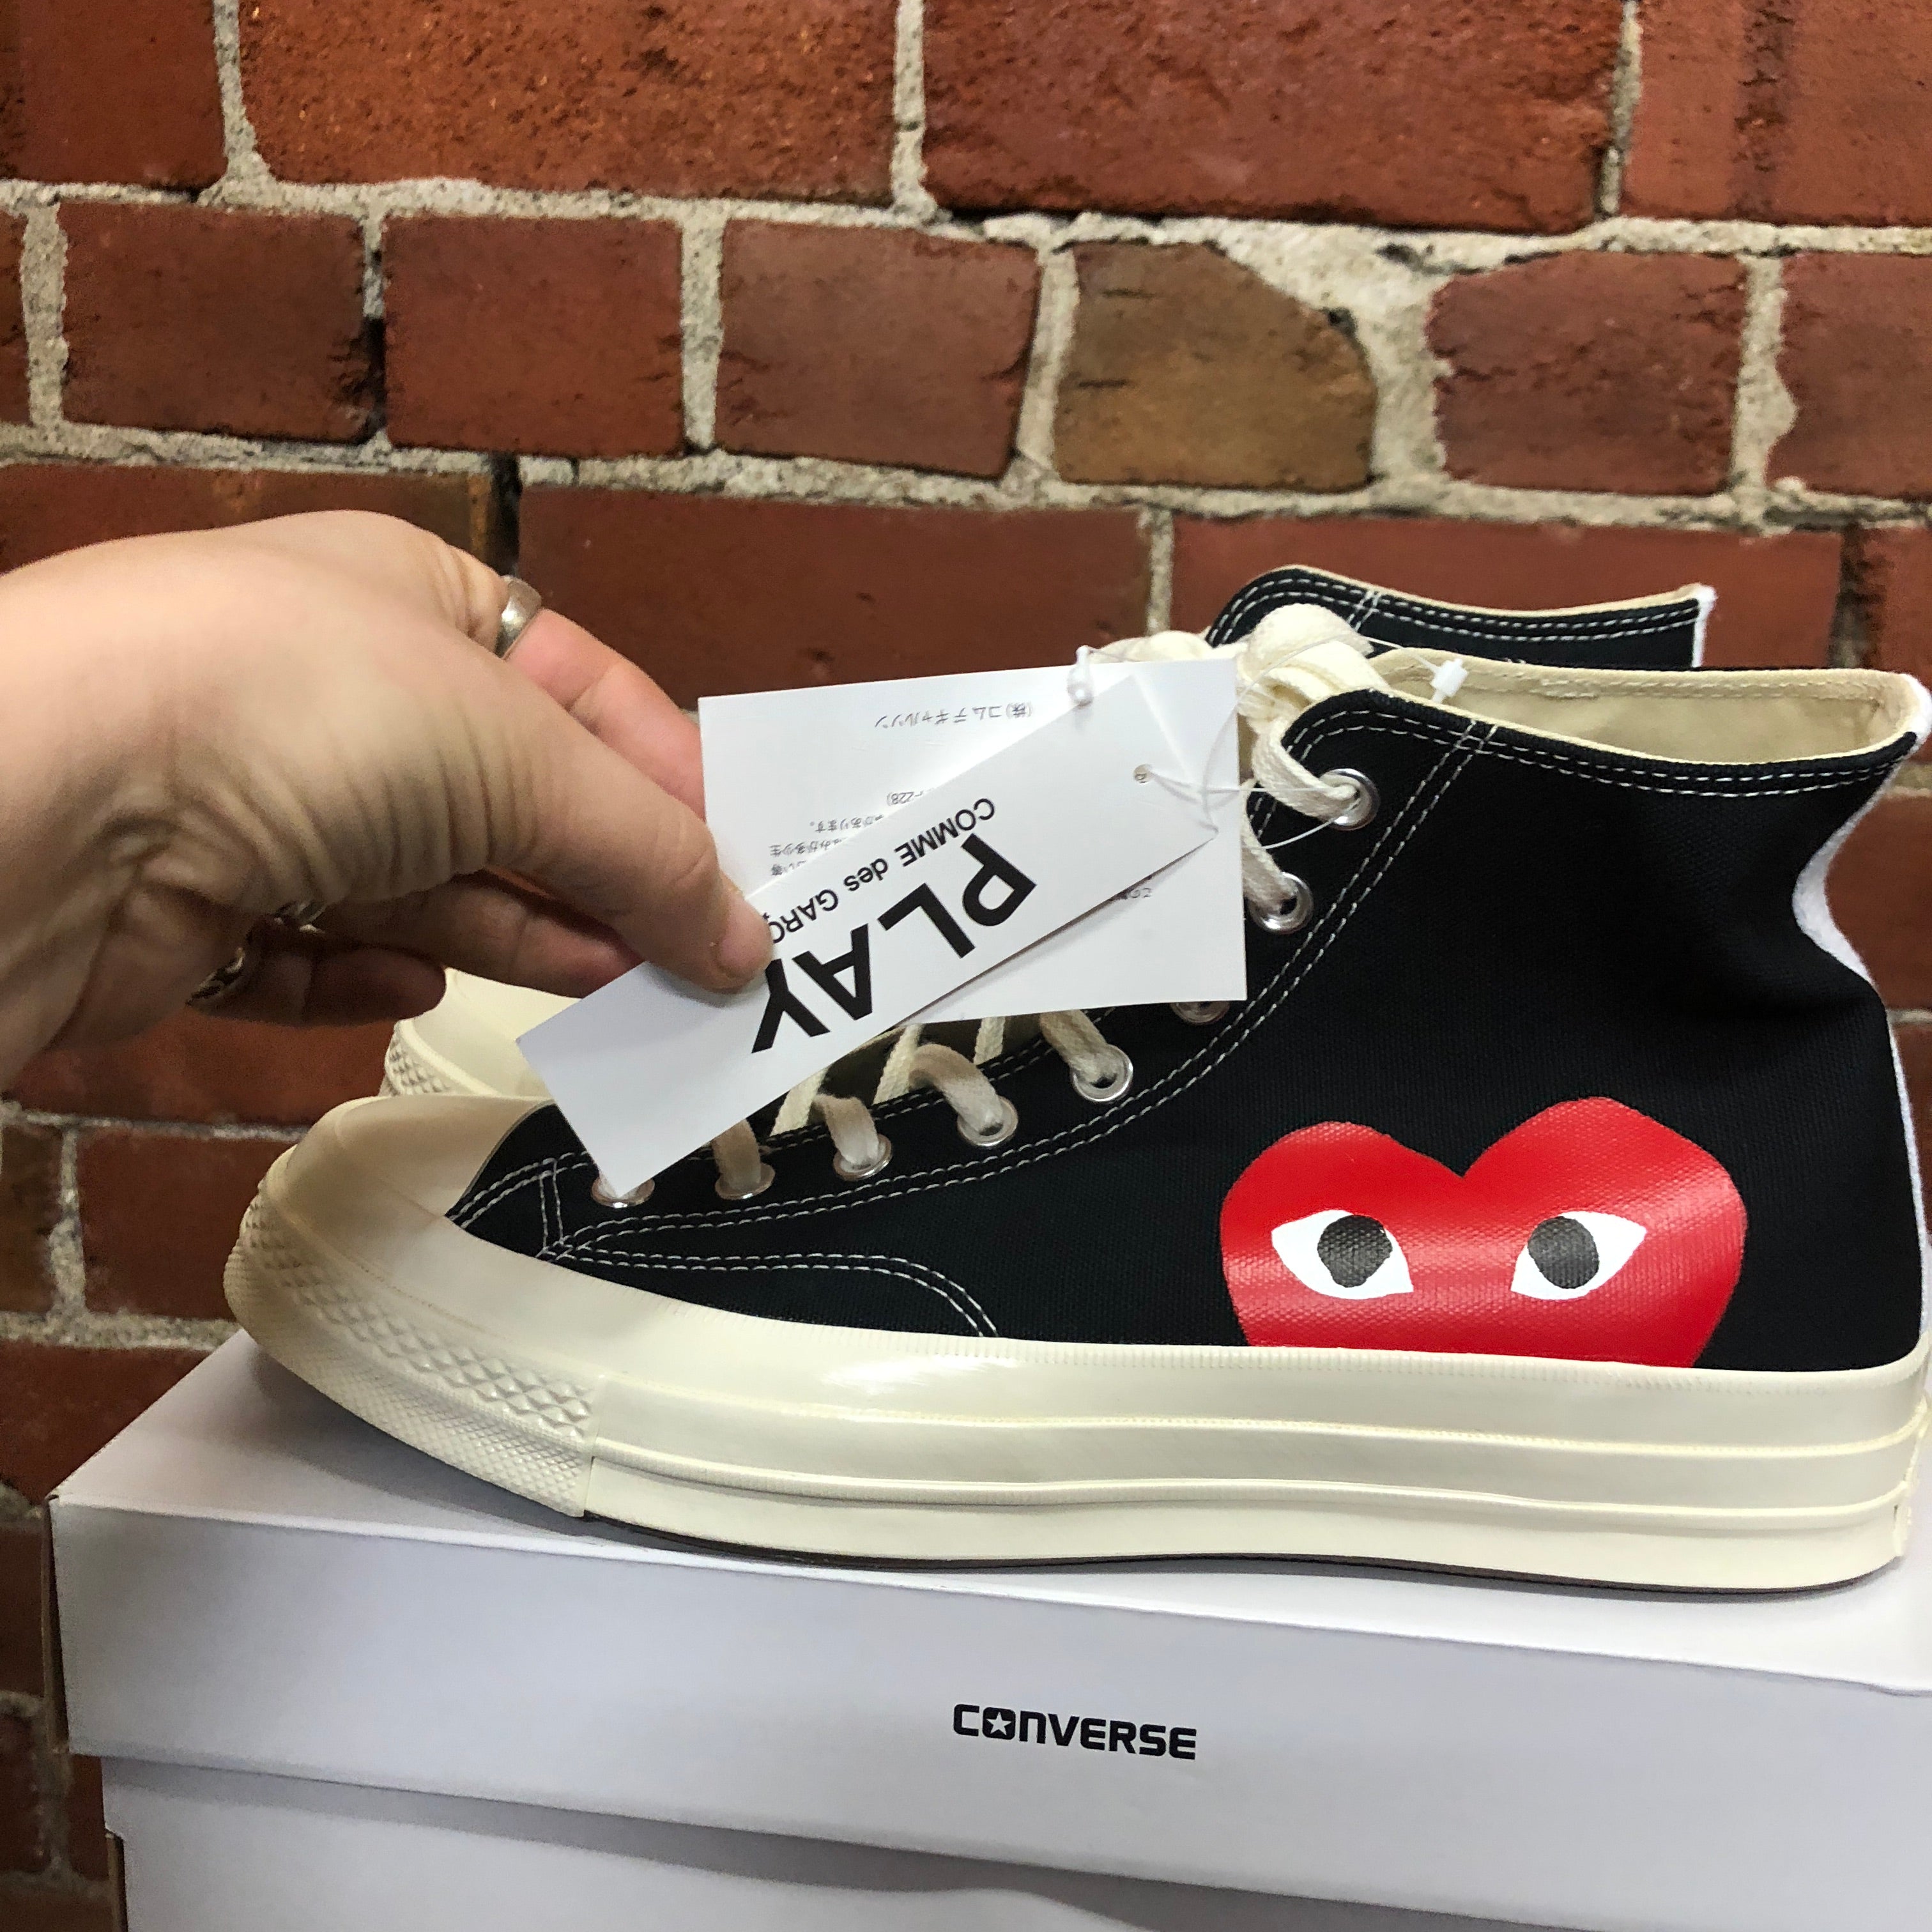 COMME DES GARCONS PLAY X CONVERSE sneakers 10M